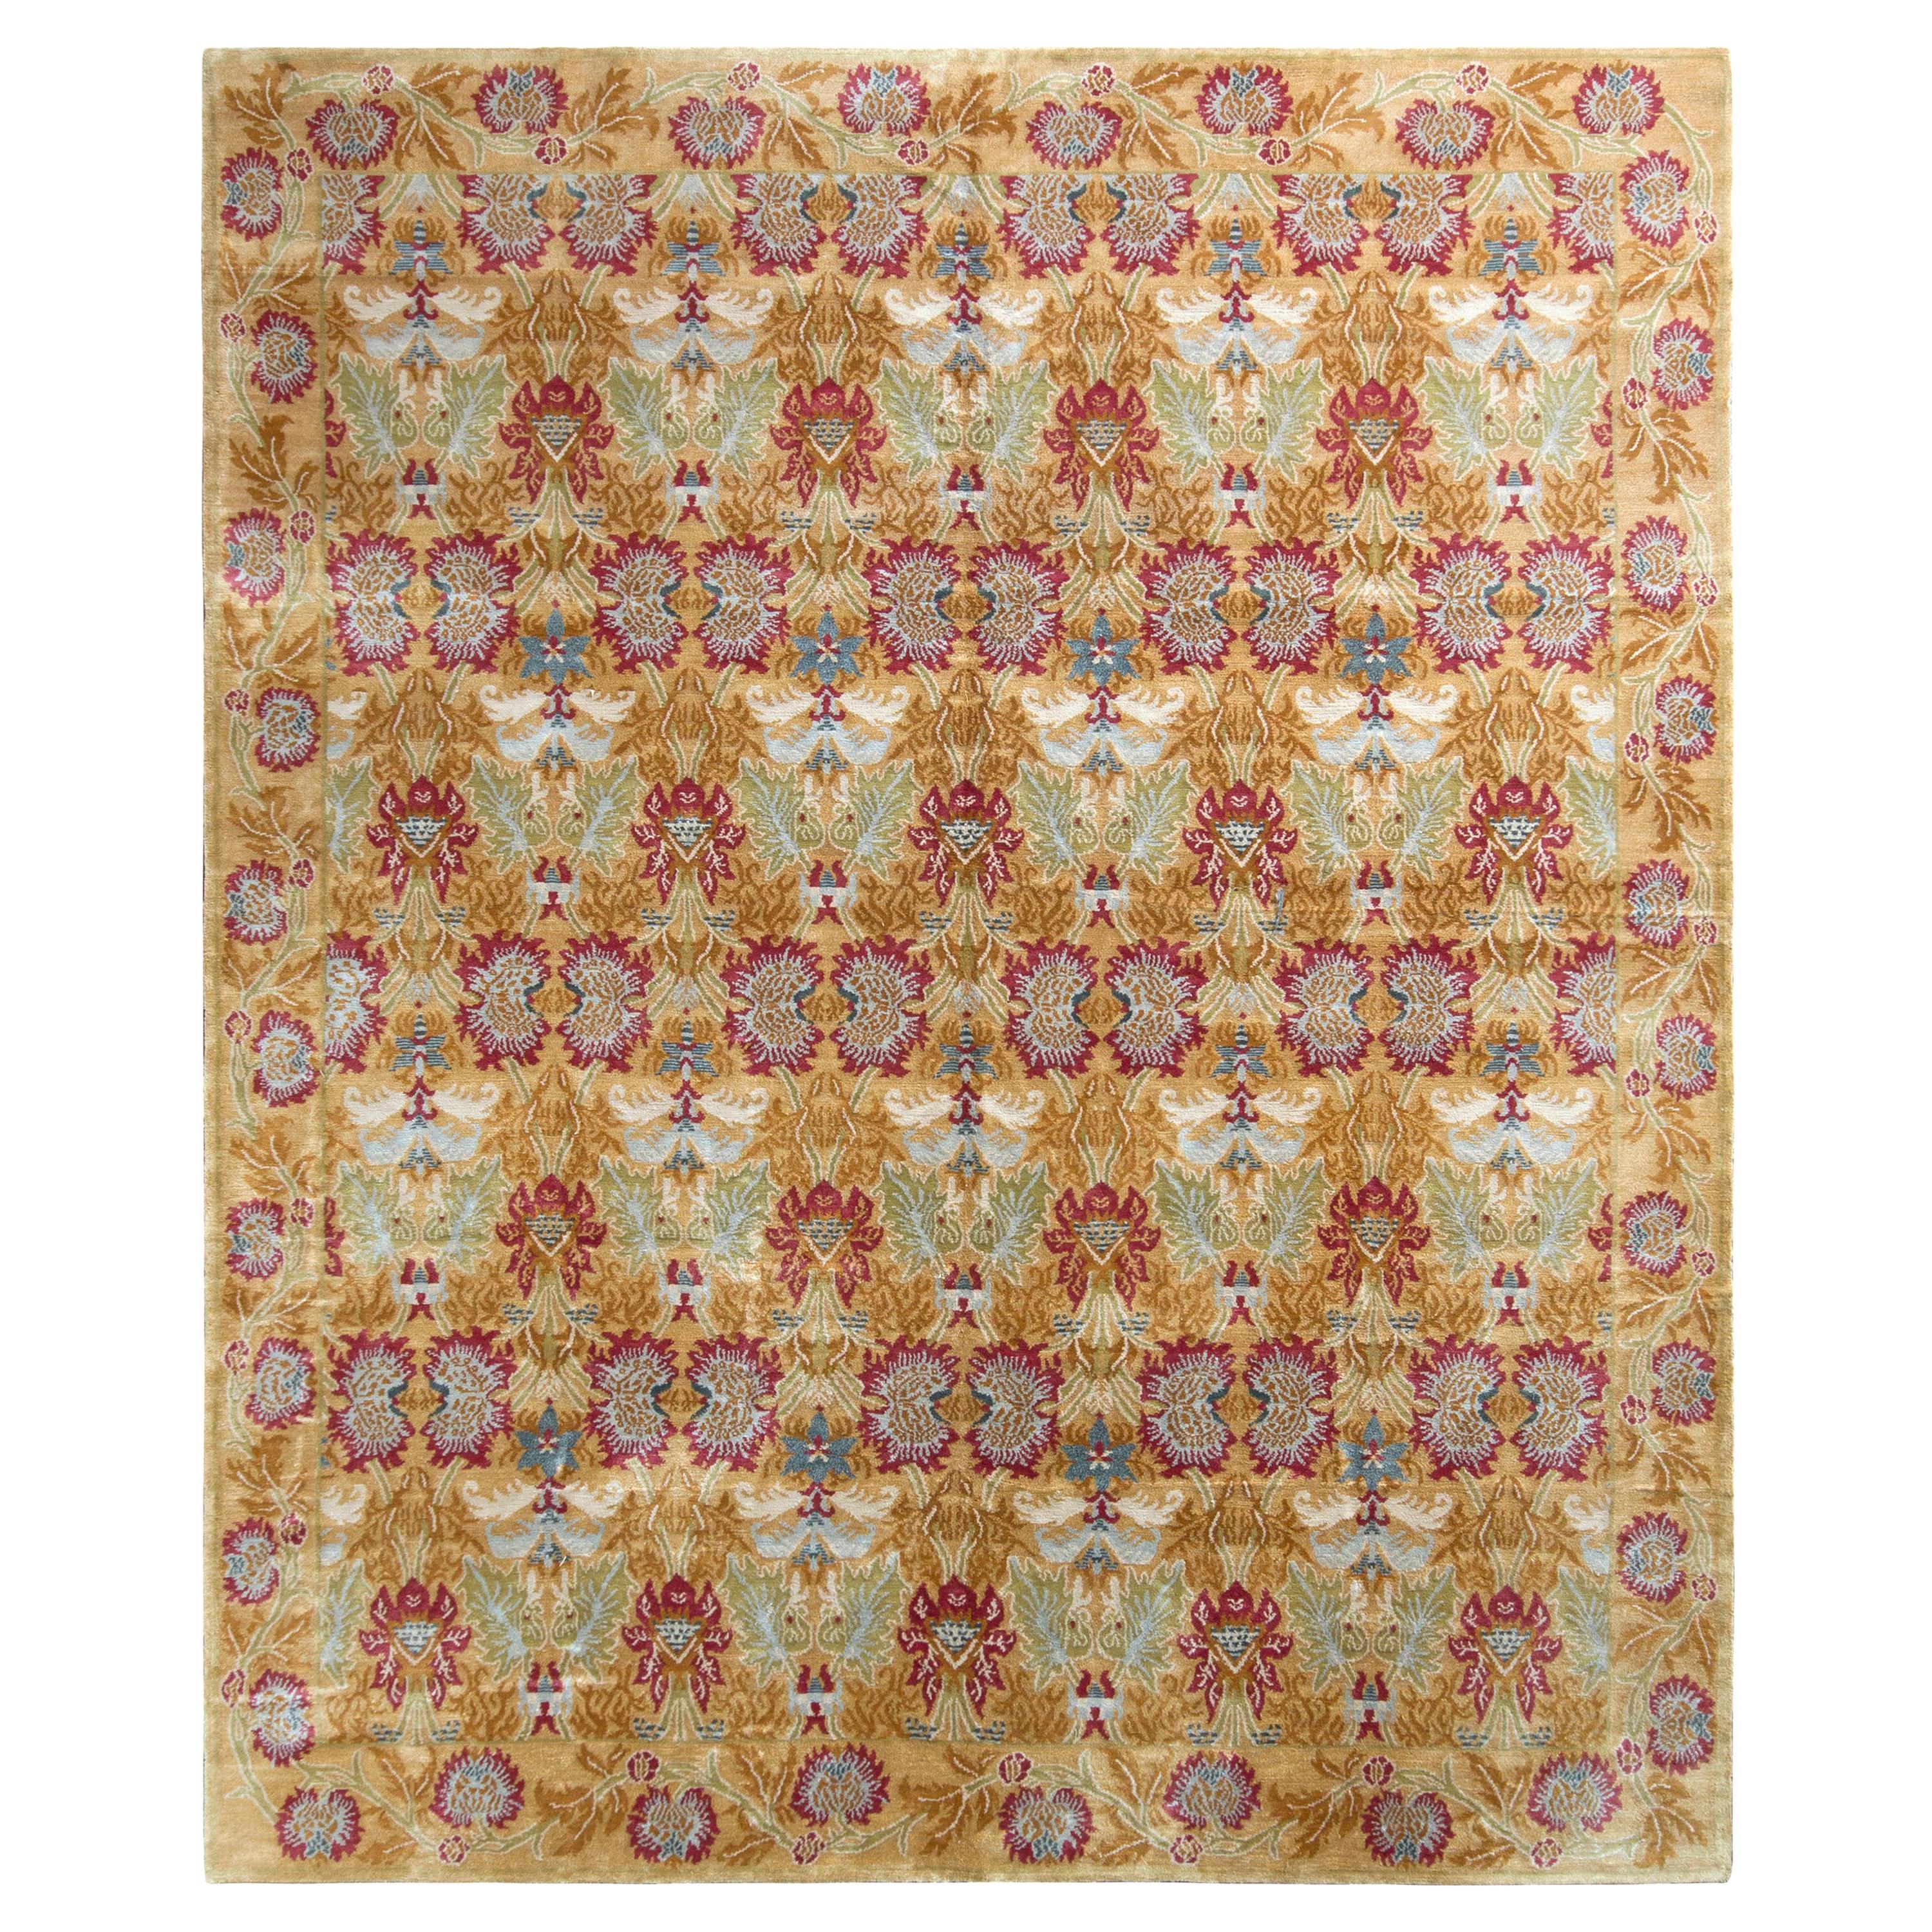 Rug & Kilim’s European Style Rug in Gold and Red All over Floral Pattern